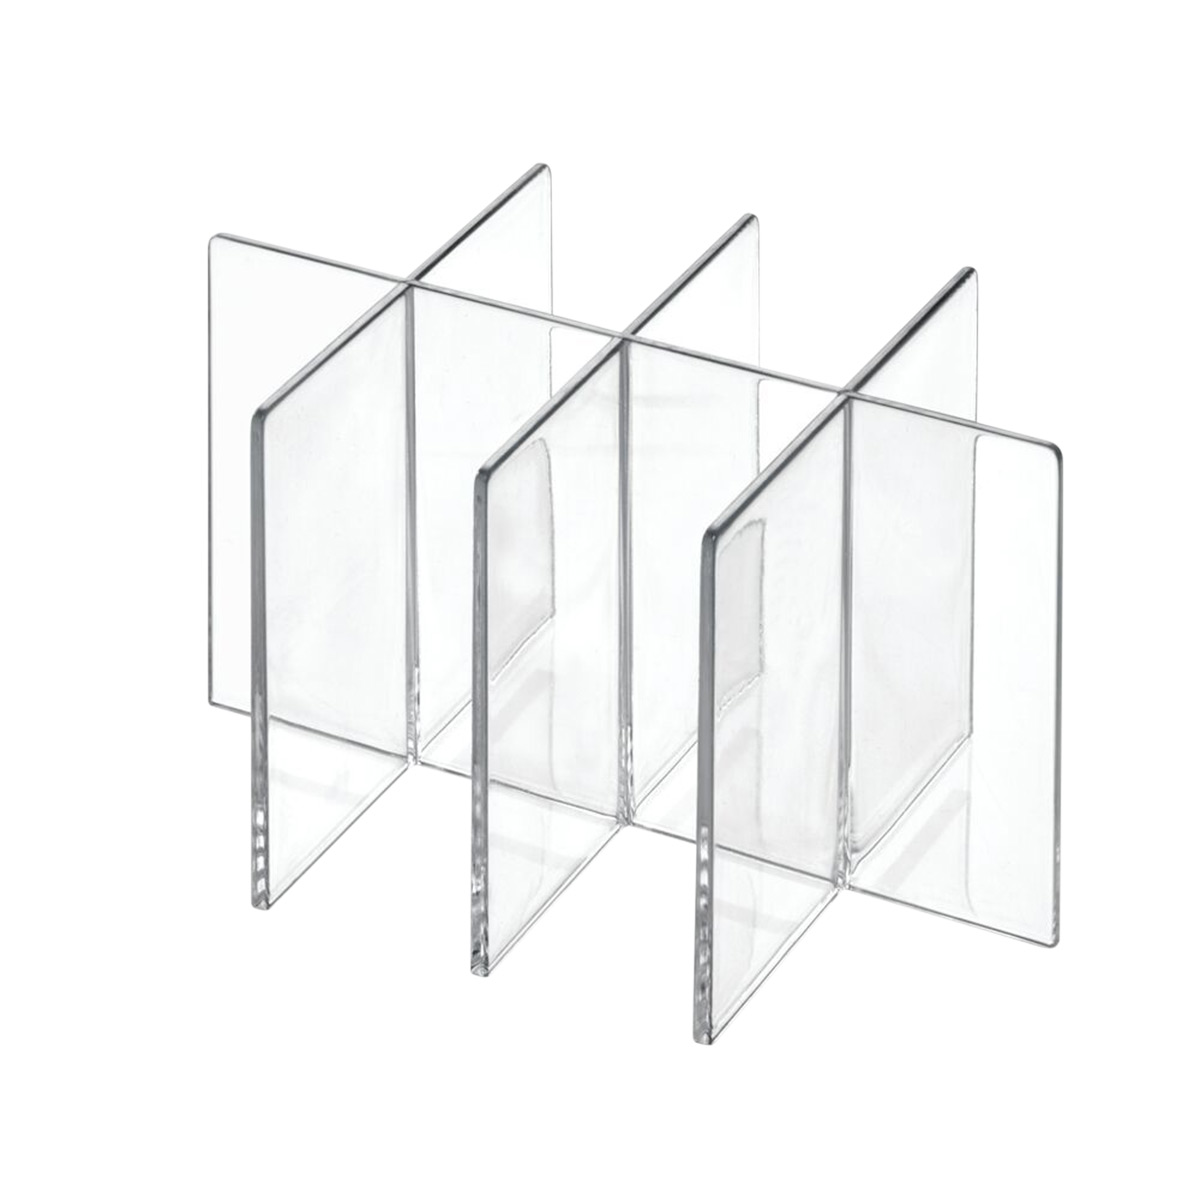 https://www.containerstore.com/catalogimages/392980/10082303-THE-Small-Bin-Divider-VEN1.jpg